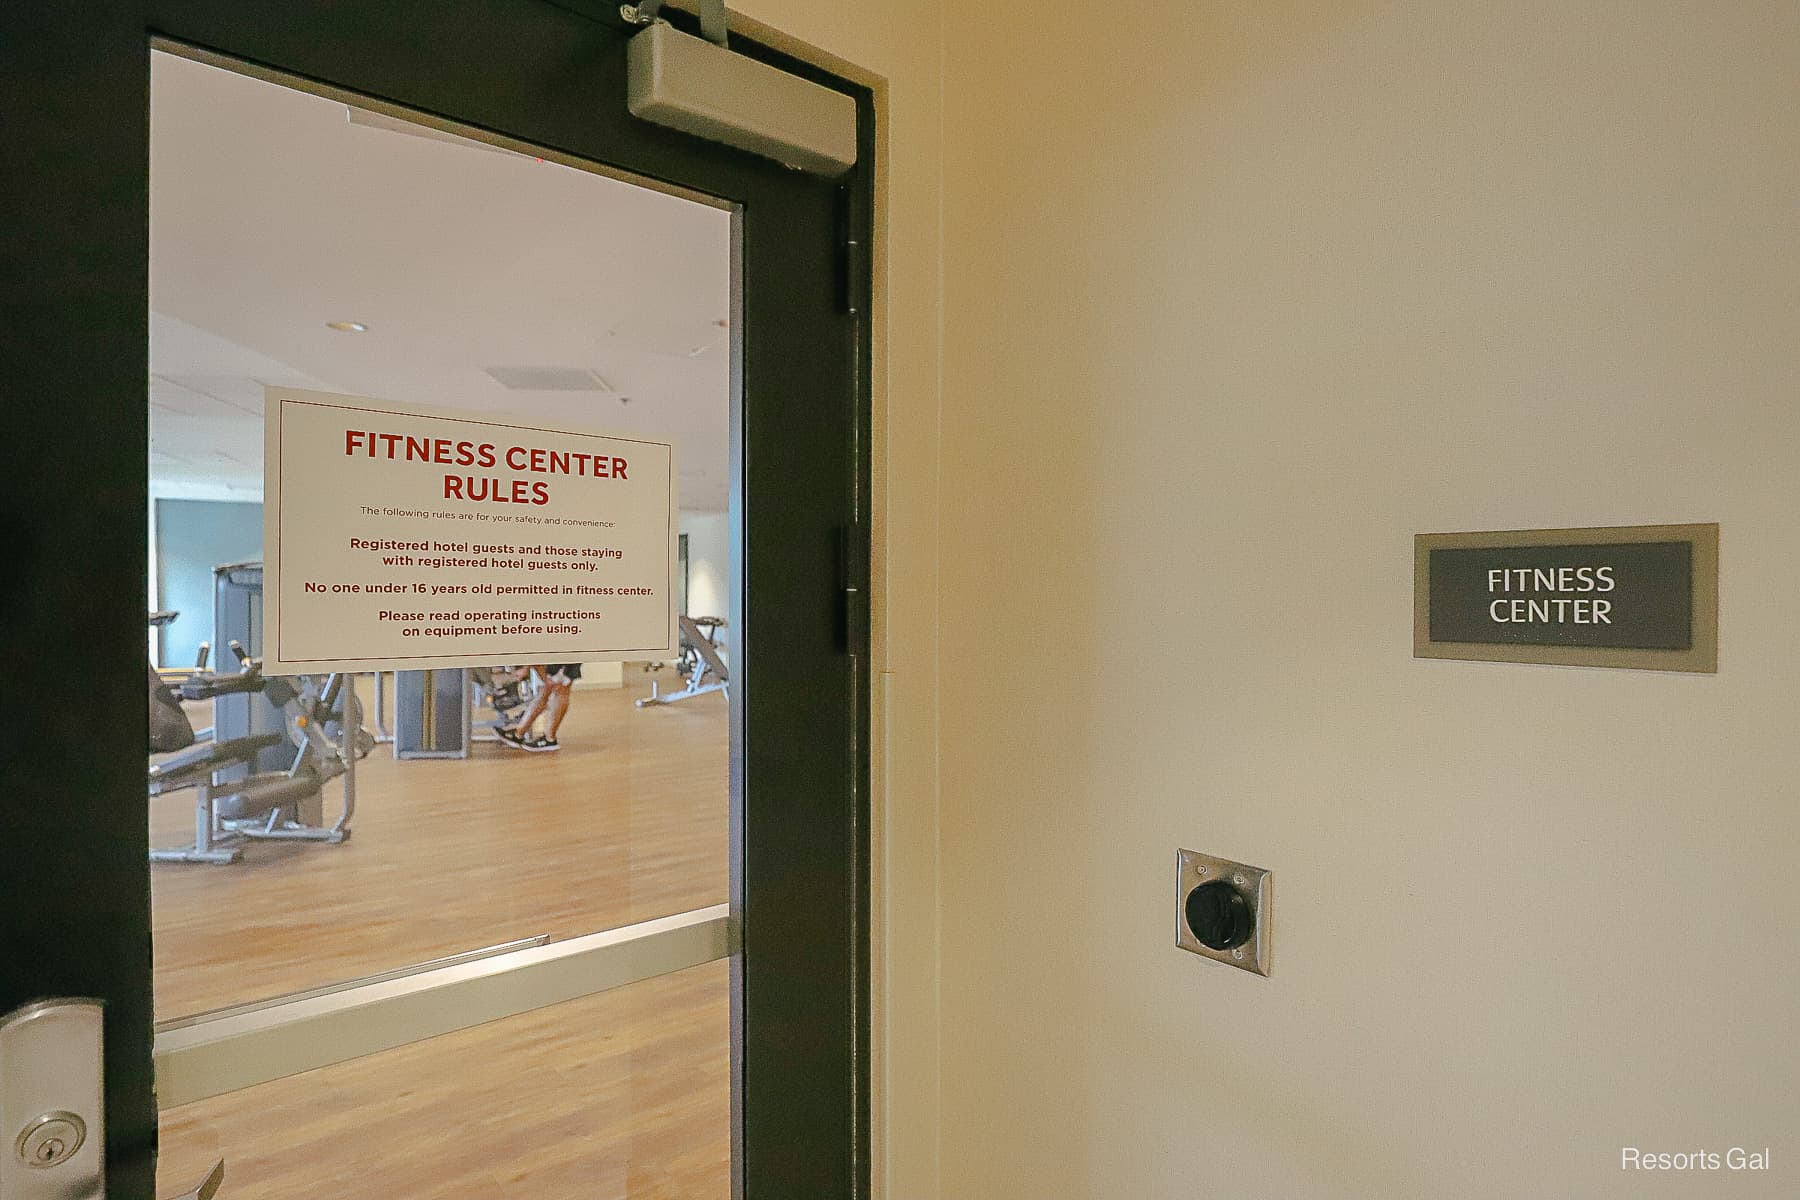 the entrance to the Fitness Center at the Drury Plaza Hotel Disney Springs